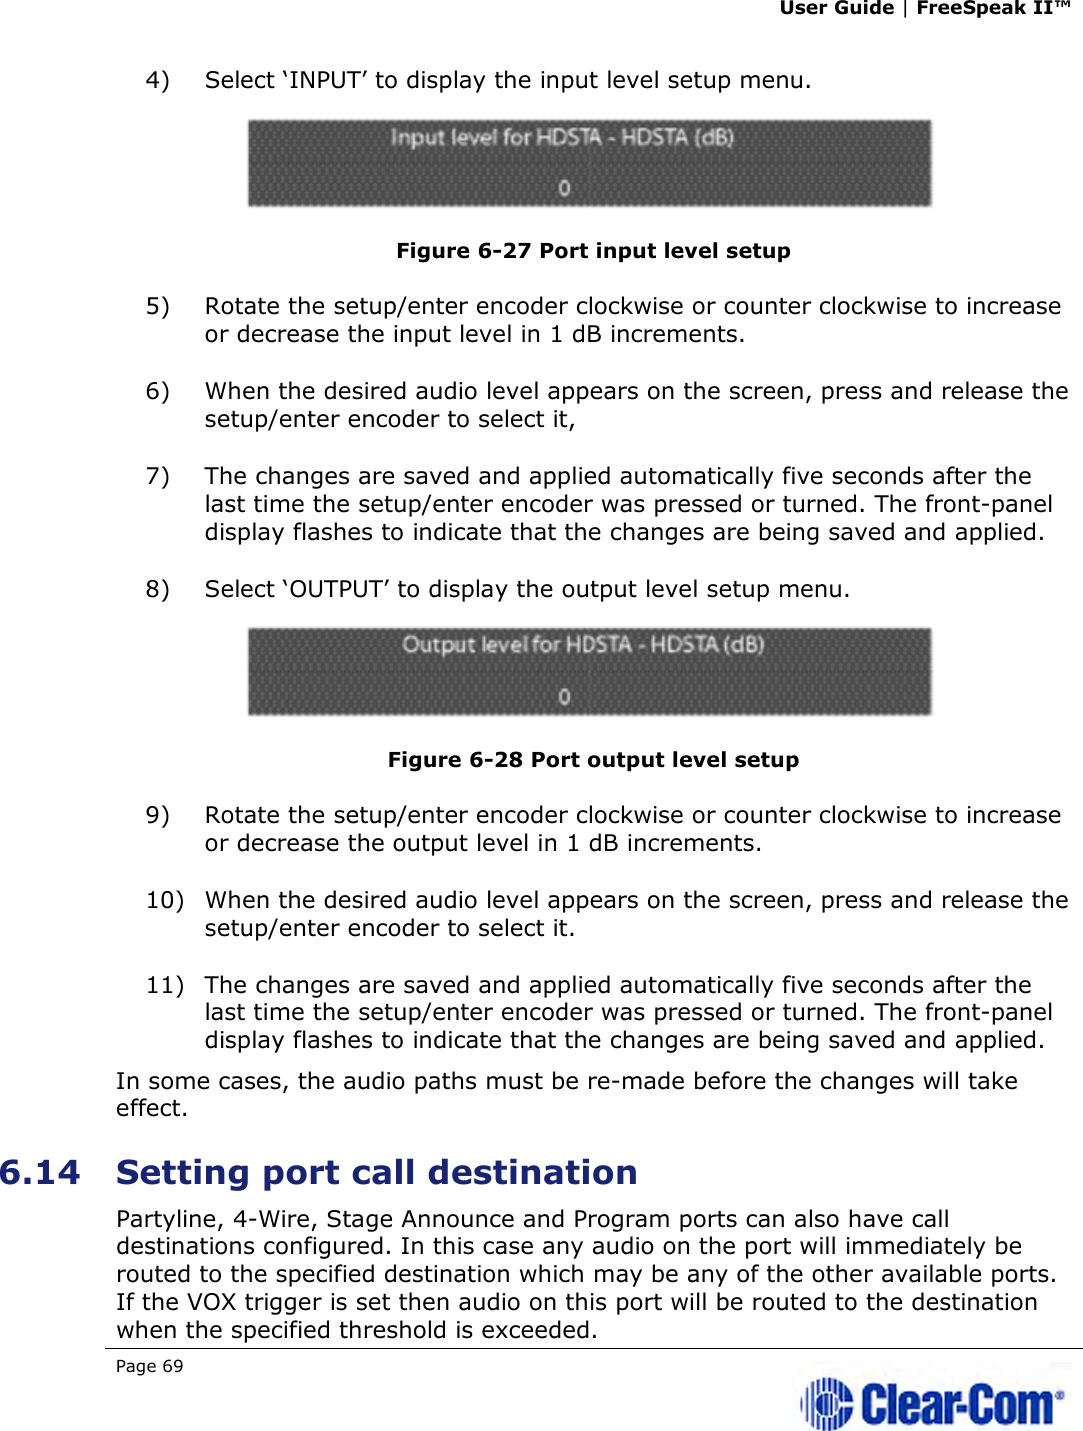 User Guide | FreeSpeak II™  Page 69   4) Select ‘INPUT’ to display the input level setup menu.   Figure 6-27 Port input level setup 5) Rotate the setup/enter encoder clockwise or counter clockwise to increase or decrease the input level in 1 dB increments.  6) When the desired audio level appears on the screen, press and release the setup/enter encoder to select it,  7) The changes are saved and applied automatically five seconds after the last time the setup/enter encoder was pressed or turned. The front-panel display flashes to indicate that the changes are being saved and applied.  8) Select ‘OUTPUT’ to display the output level setup menu.   Figure 6-28 Port output level setup 9) Rotate the setup/enter encoder clockwise or counter clockwise to increase or decrease the output level in 1 dB increments.  10) When the desired audio level appears on the screen, press and release the setup/enter encoder to select it. 11) The changes are saved and applied automatically five seconds after the last time the setup/enter encoder was pressed or turned. The front-panel display flashes to indicate that the changes are being saved and applied.  In some cases, the audio paths must be re-made before the changes will take effect.  6.14 Setting port call destination Partyline, 4-Wire, Stage Announce and Program ports can also have call destinations configured. In this case any audio on the port will immediately be routed to the specified destination which may be any of the other available ports. If the VOX trigger is set then audio on this port will be routed to the destination when the specified threshold is exceeded. 